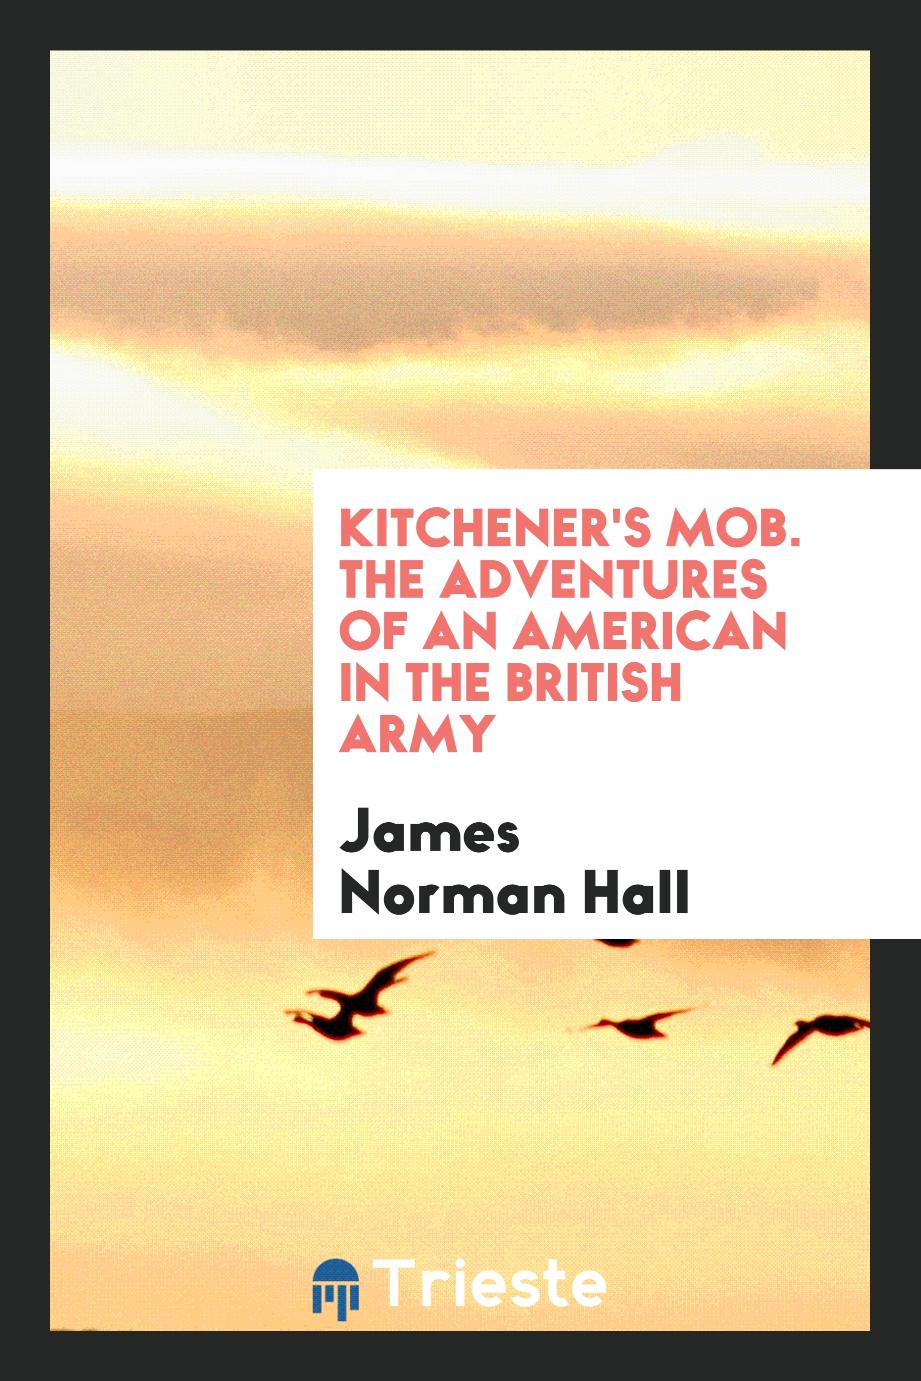 Kitchener's Mob. The Adventures of an American in the British Army